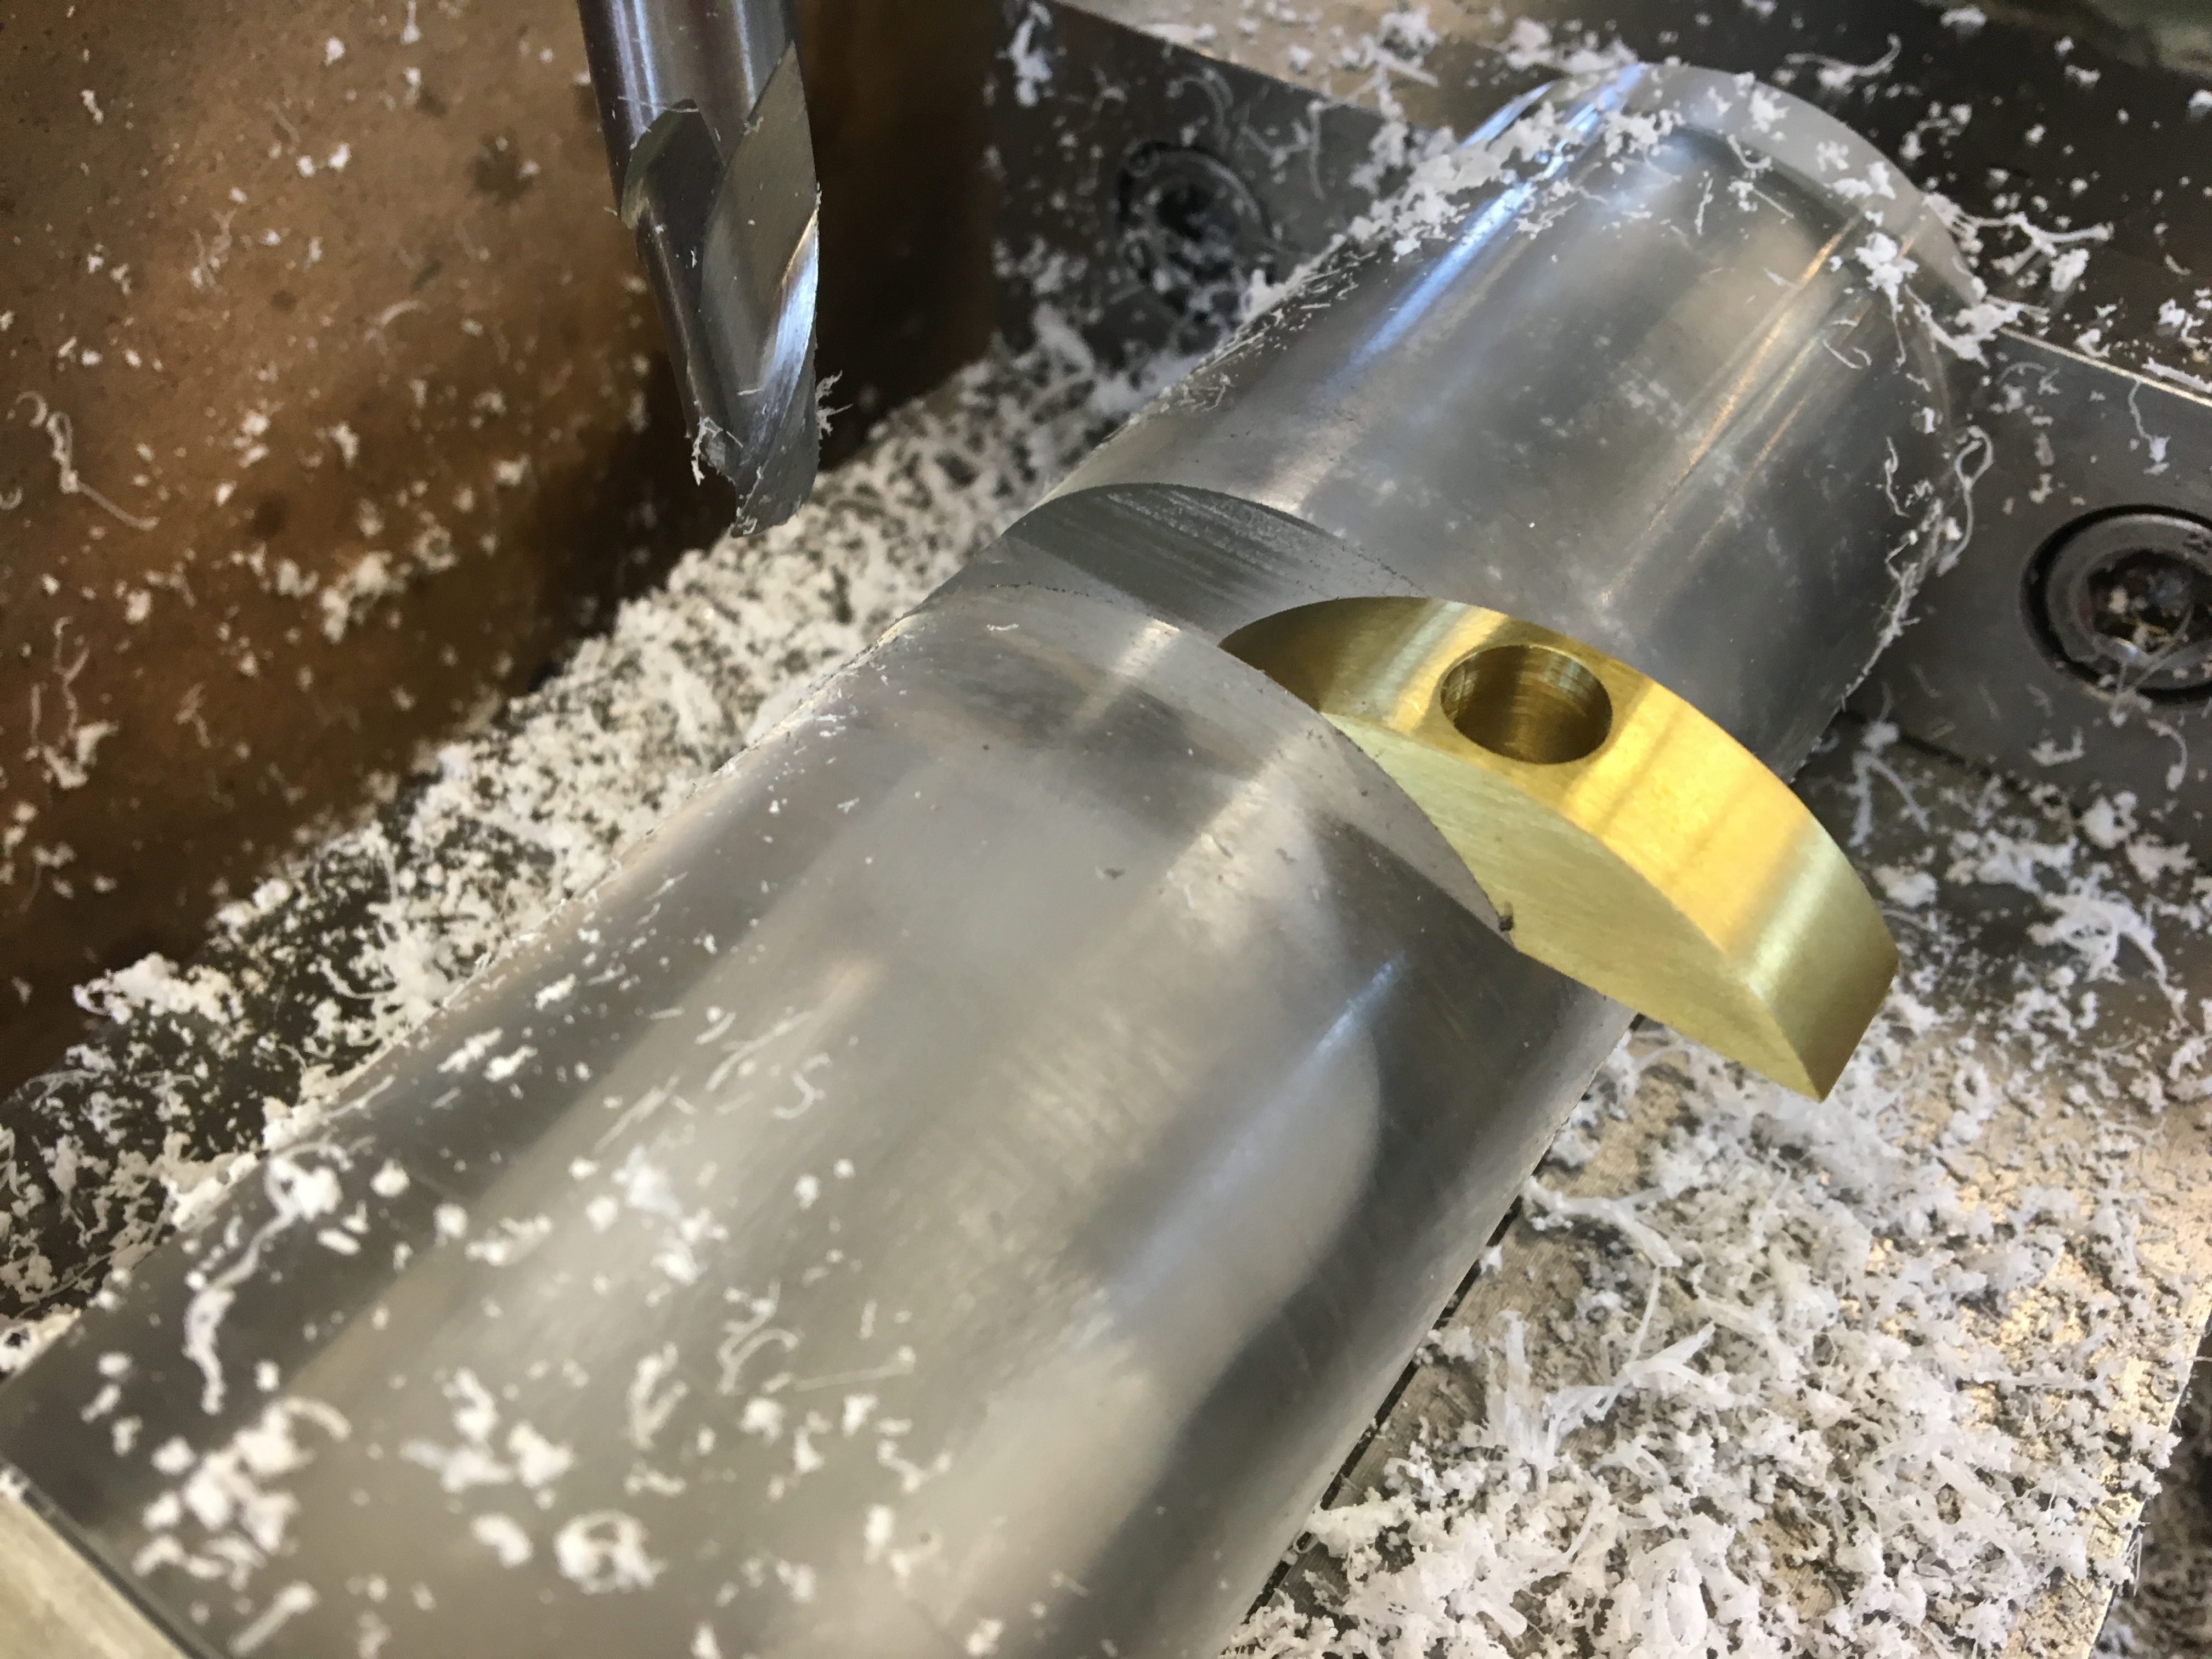 Testing the fit of the brass insets in the hourglass